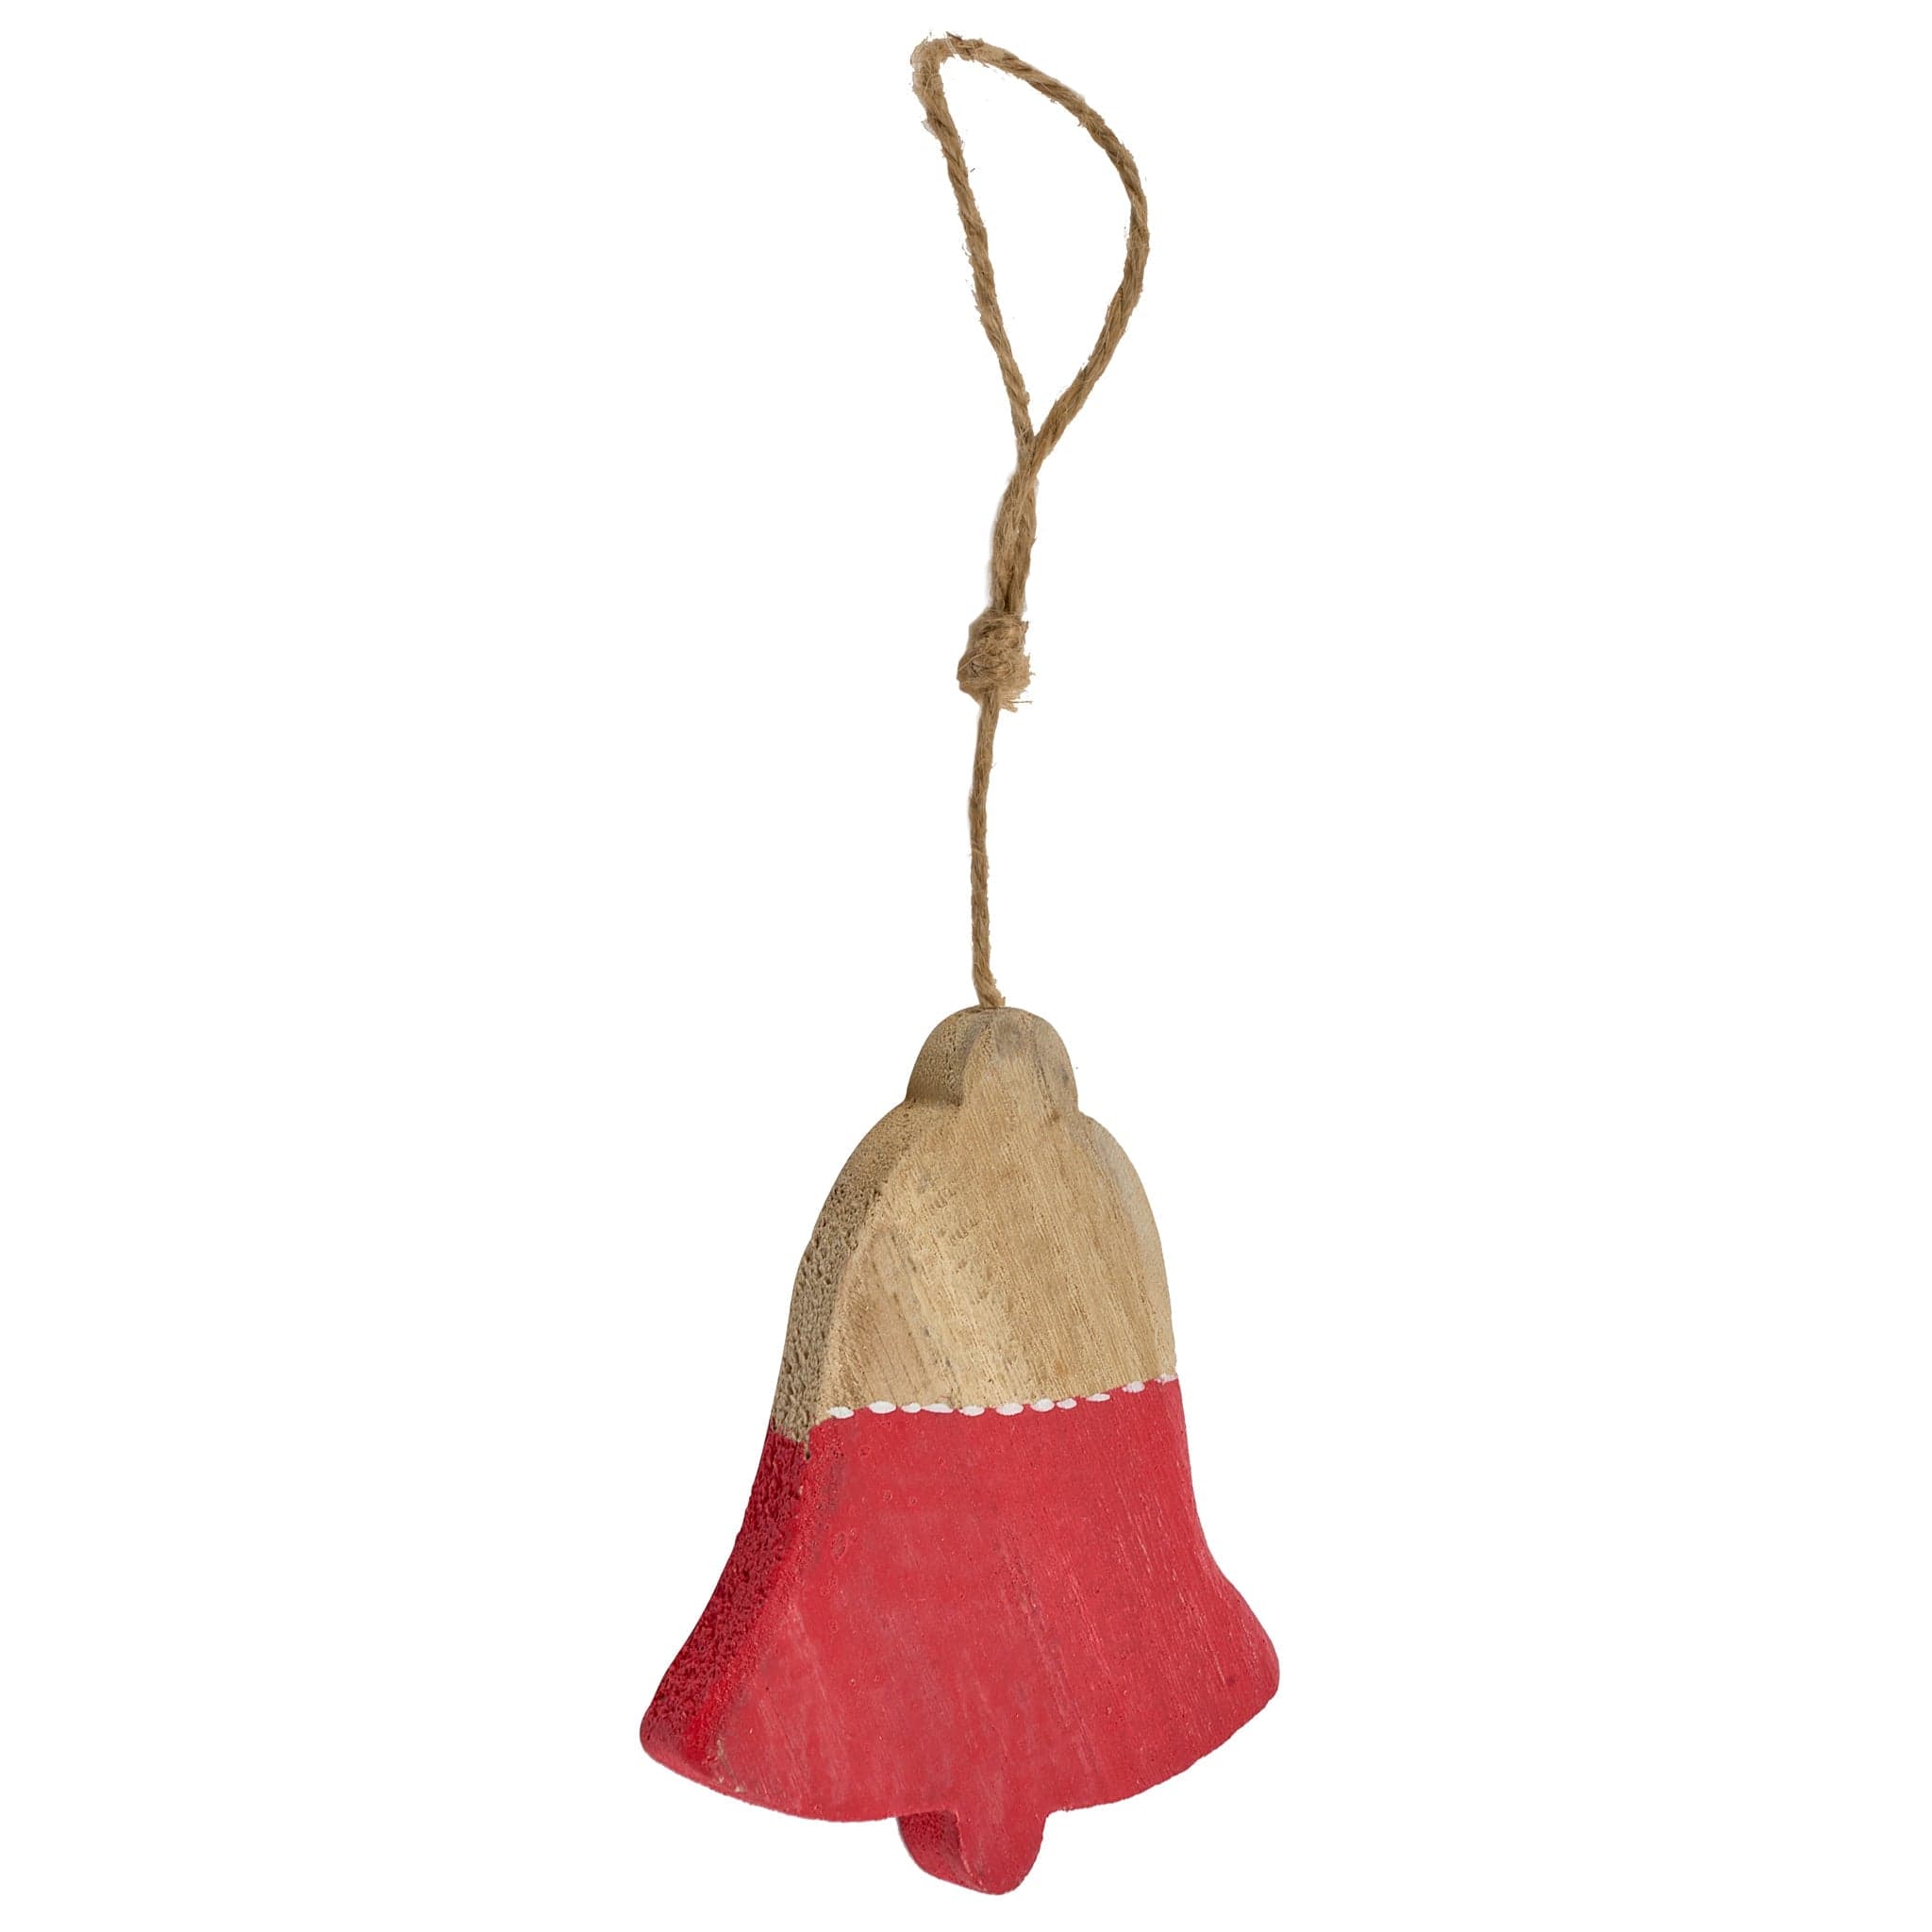 Rustic Christmas Tree Decoration - Wooden Red Bell 8718885331226 only5pounds-com